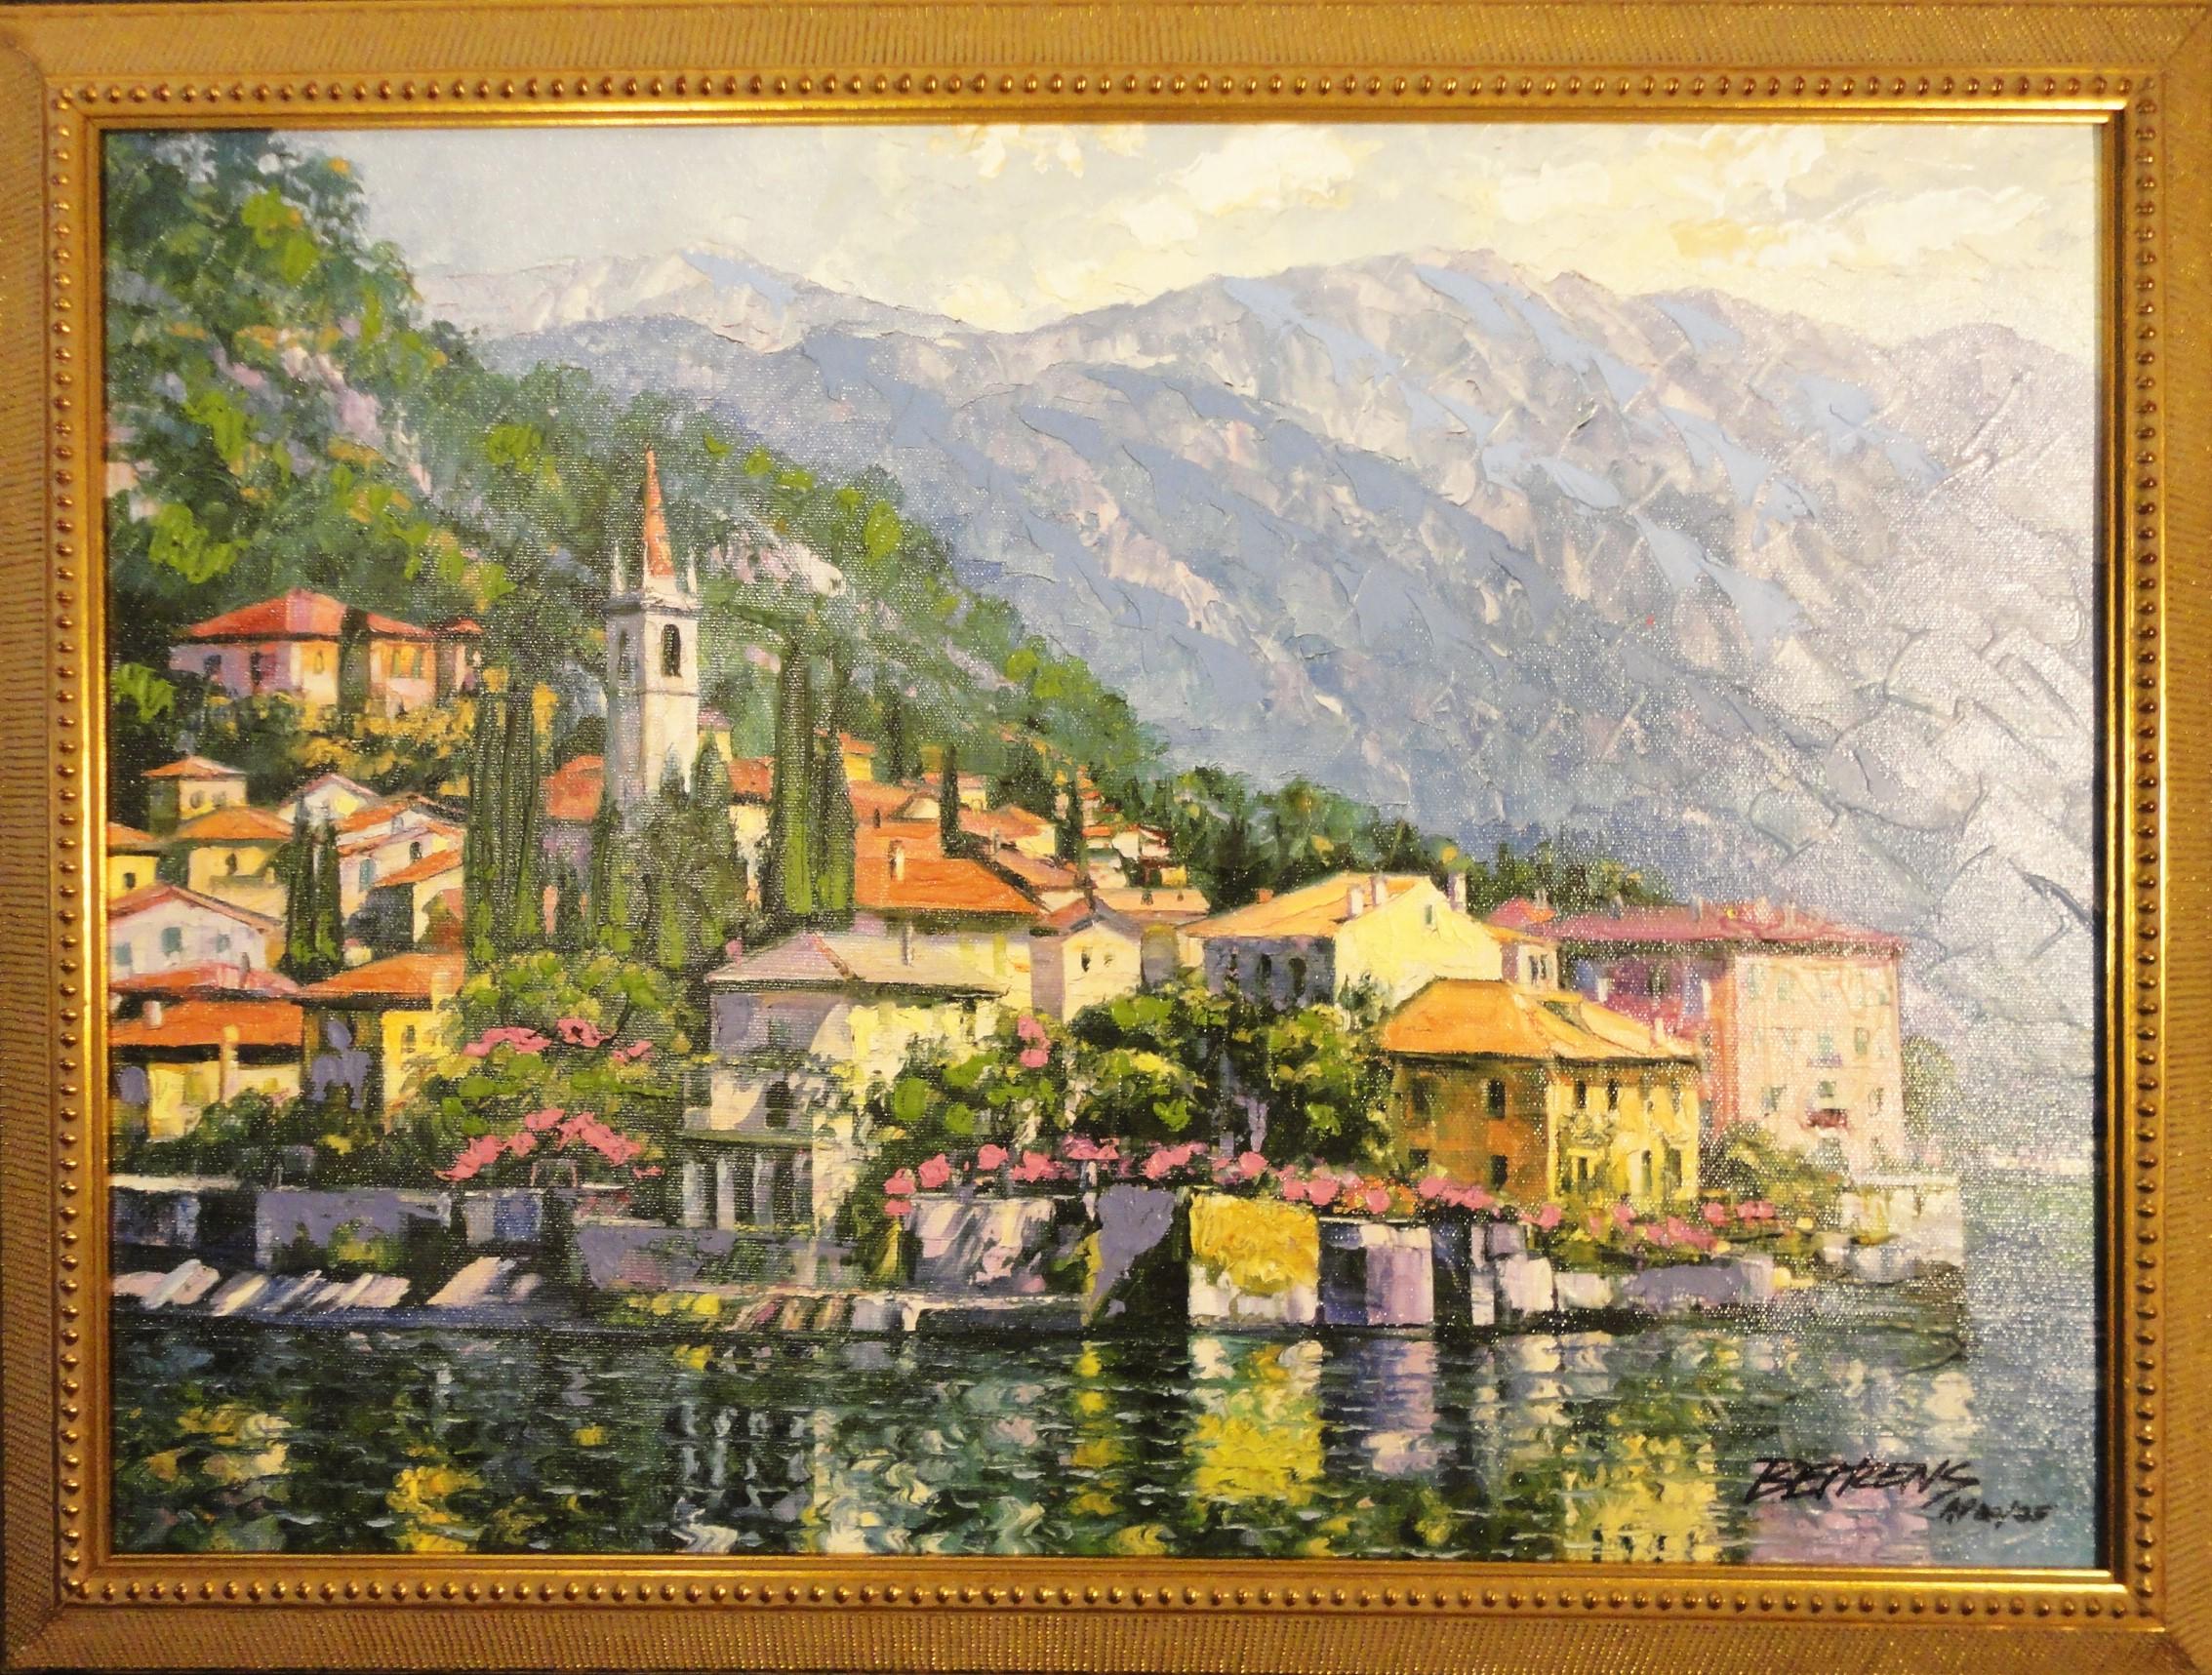 Reflections of Lake Como-Framed Limited Edition Giclee on Canvas, Signed  - Print by Howard Behrens